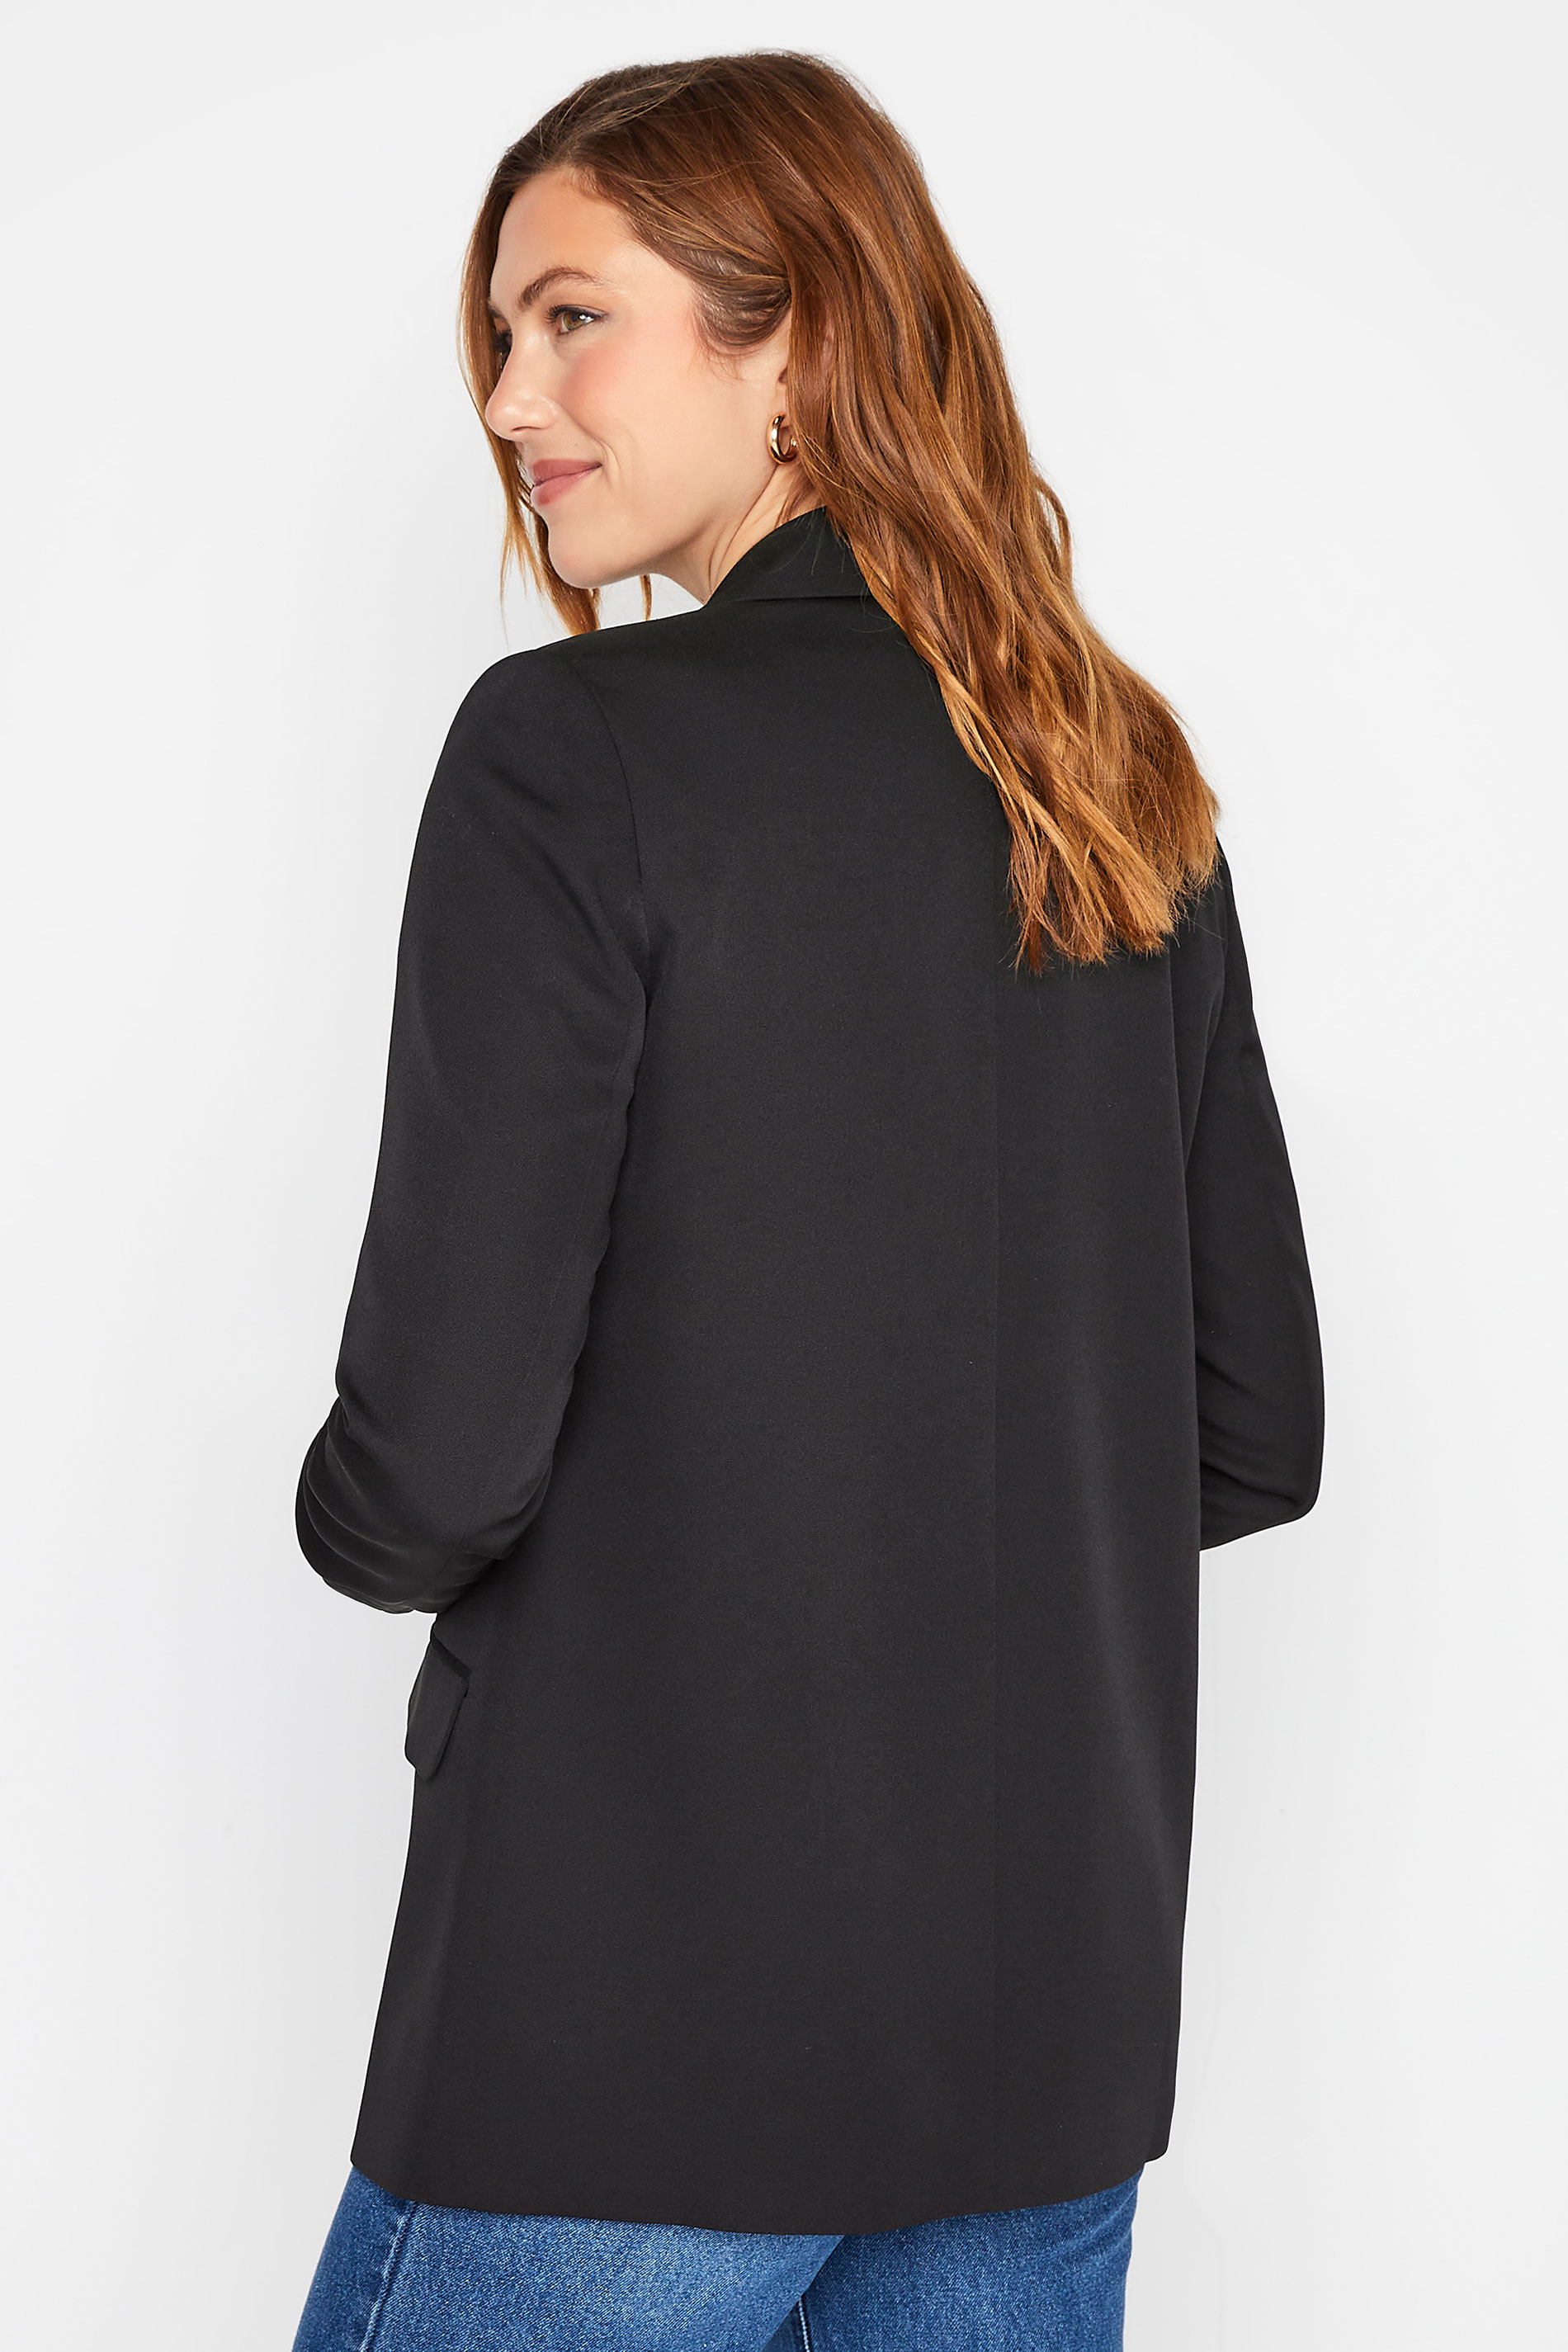 LTS Tall Women's Black Double Breasted Blazer | Long Tall Sally 3